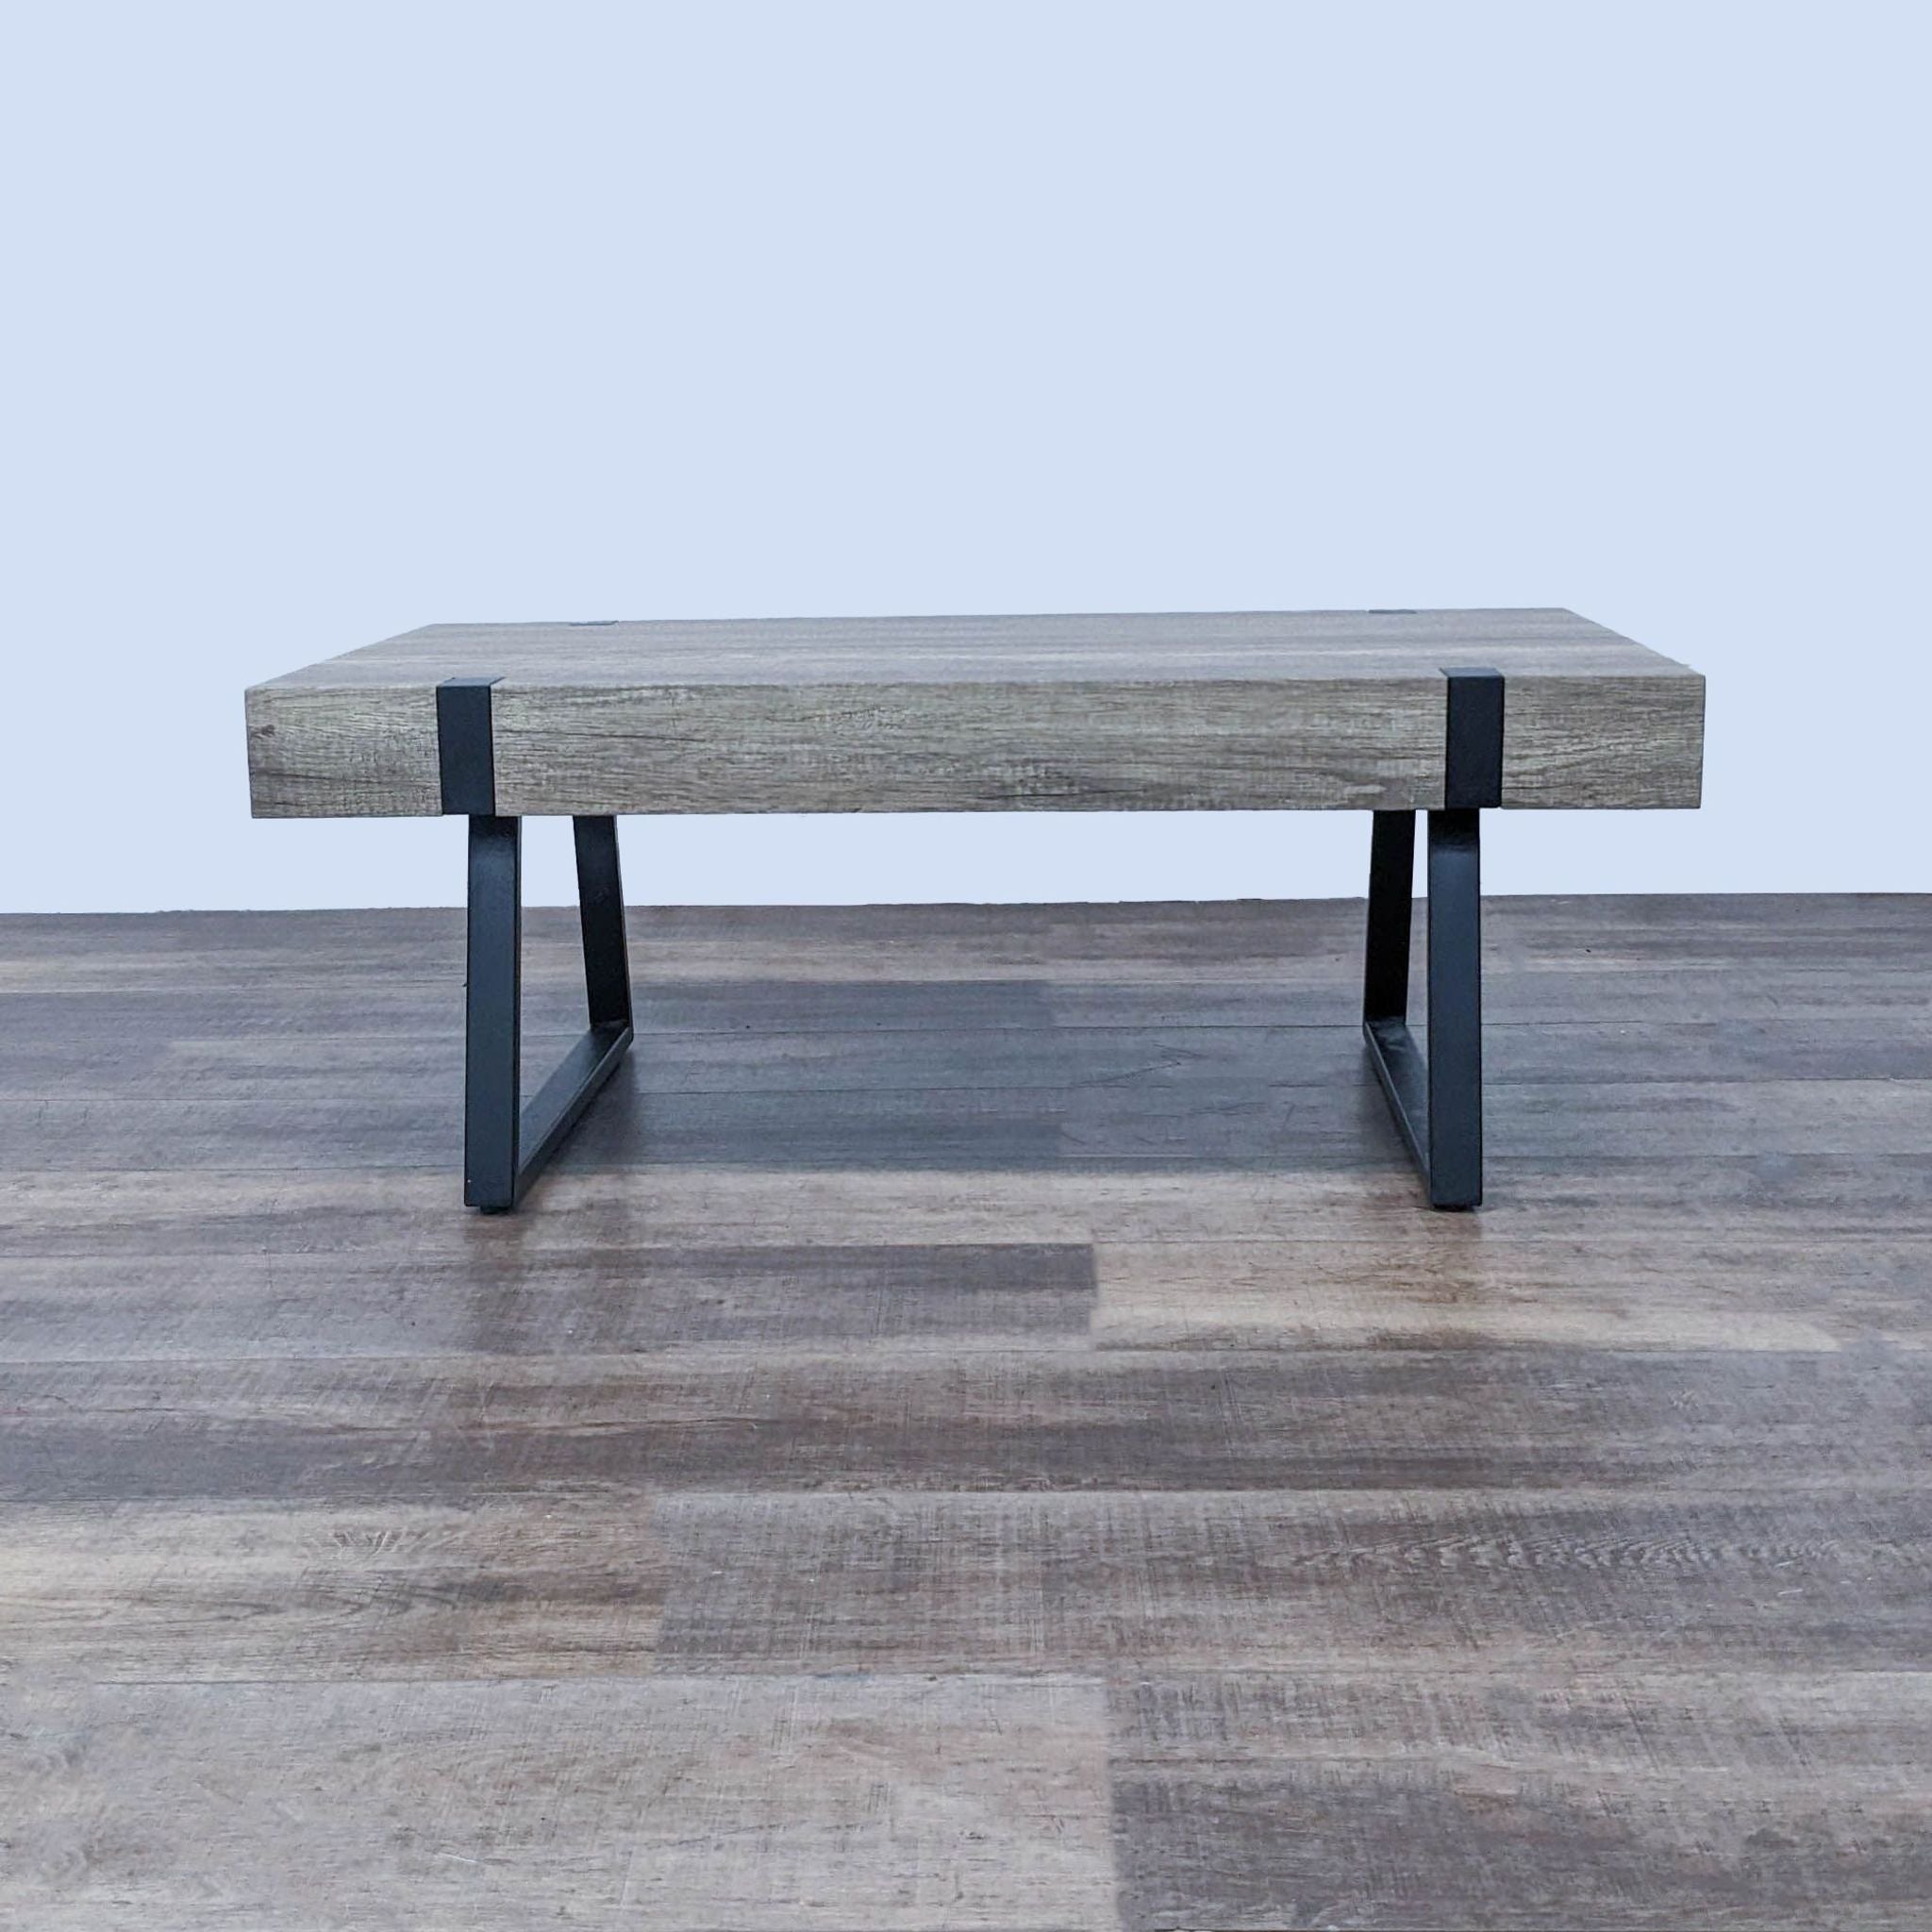 Reperch coffee table with a wooden top and black metal legs, against a wood floor and gray wall.